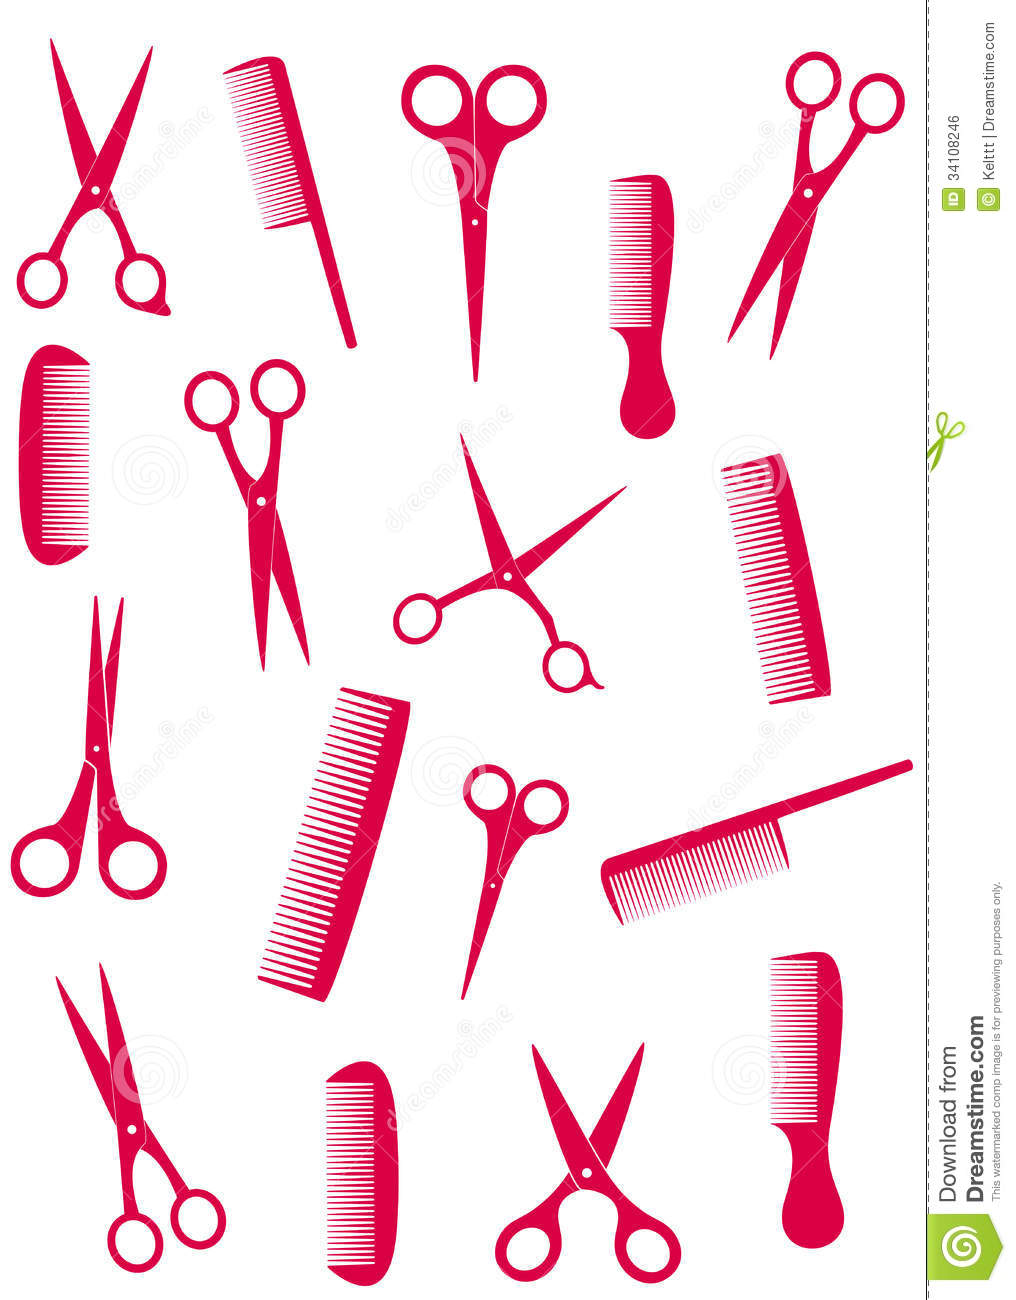 Background With Isolated Pink Comb And Scissors Silhouette Mr No Pr No